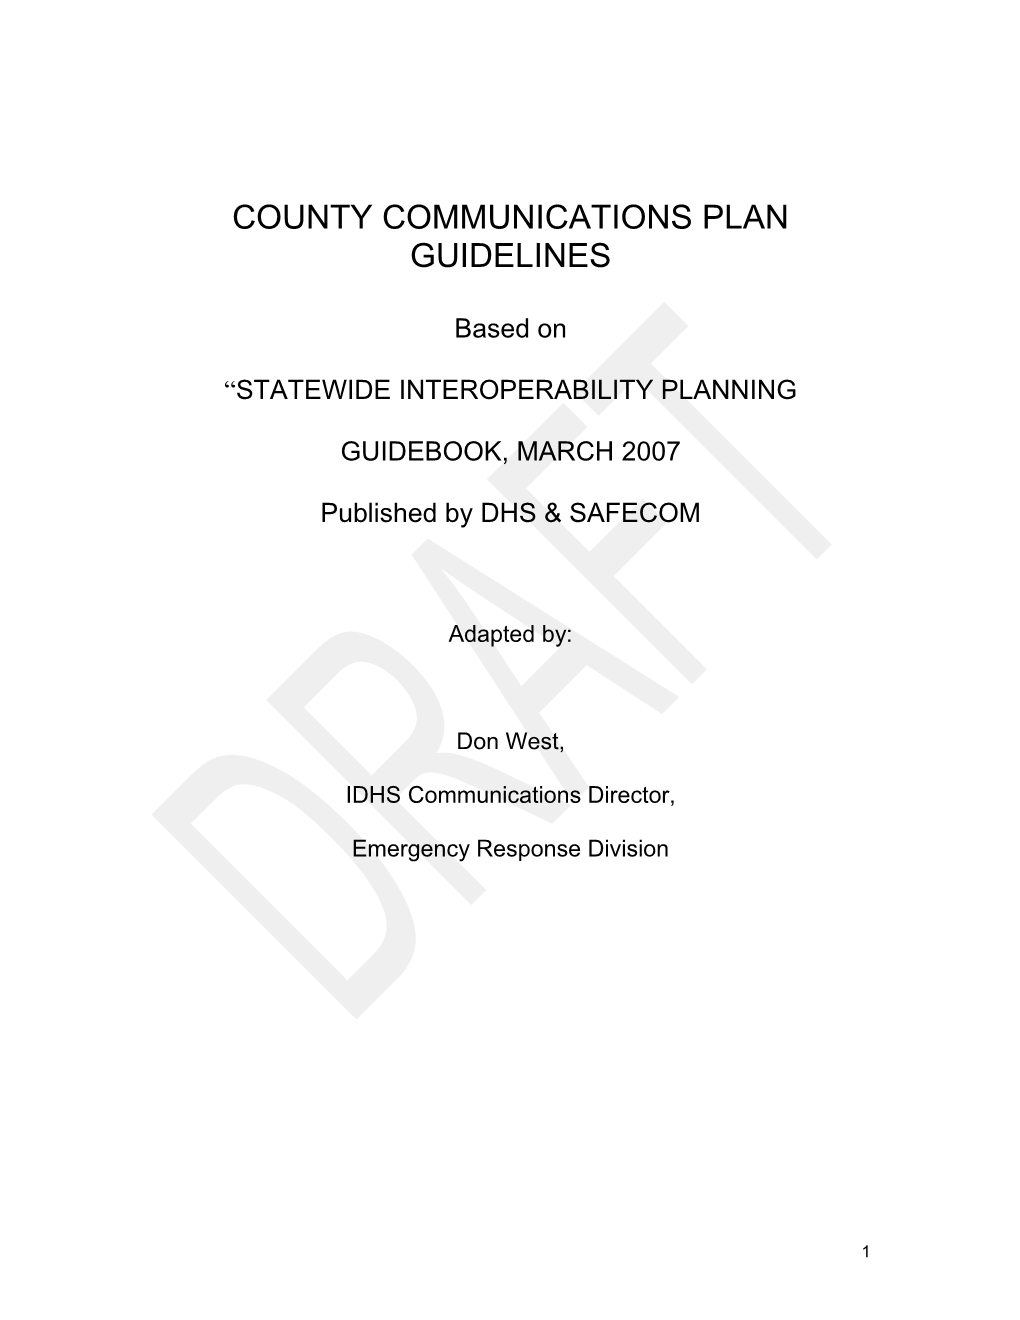 County Communications Plan Guidelines